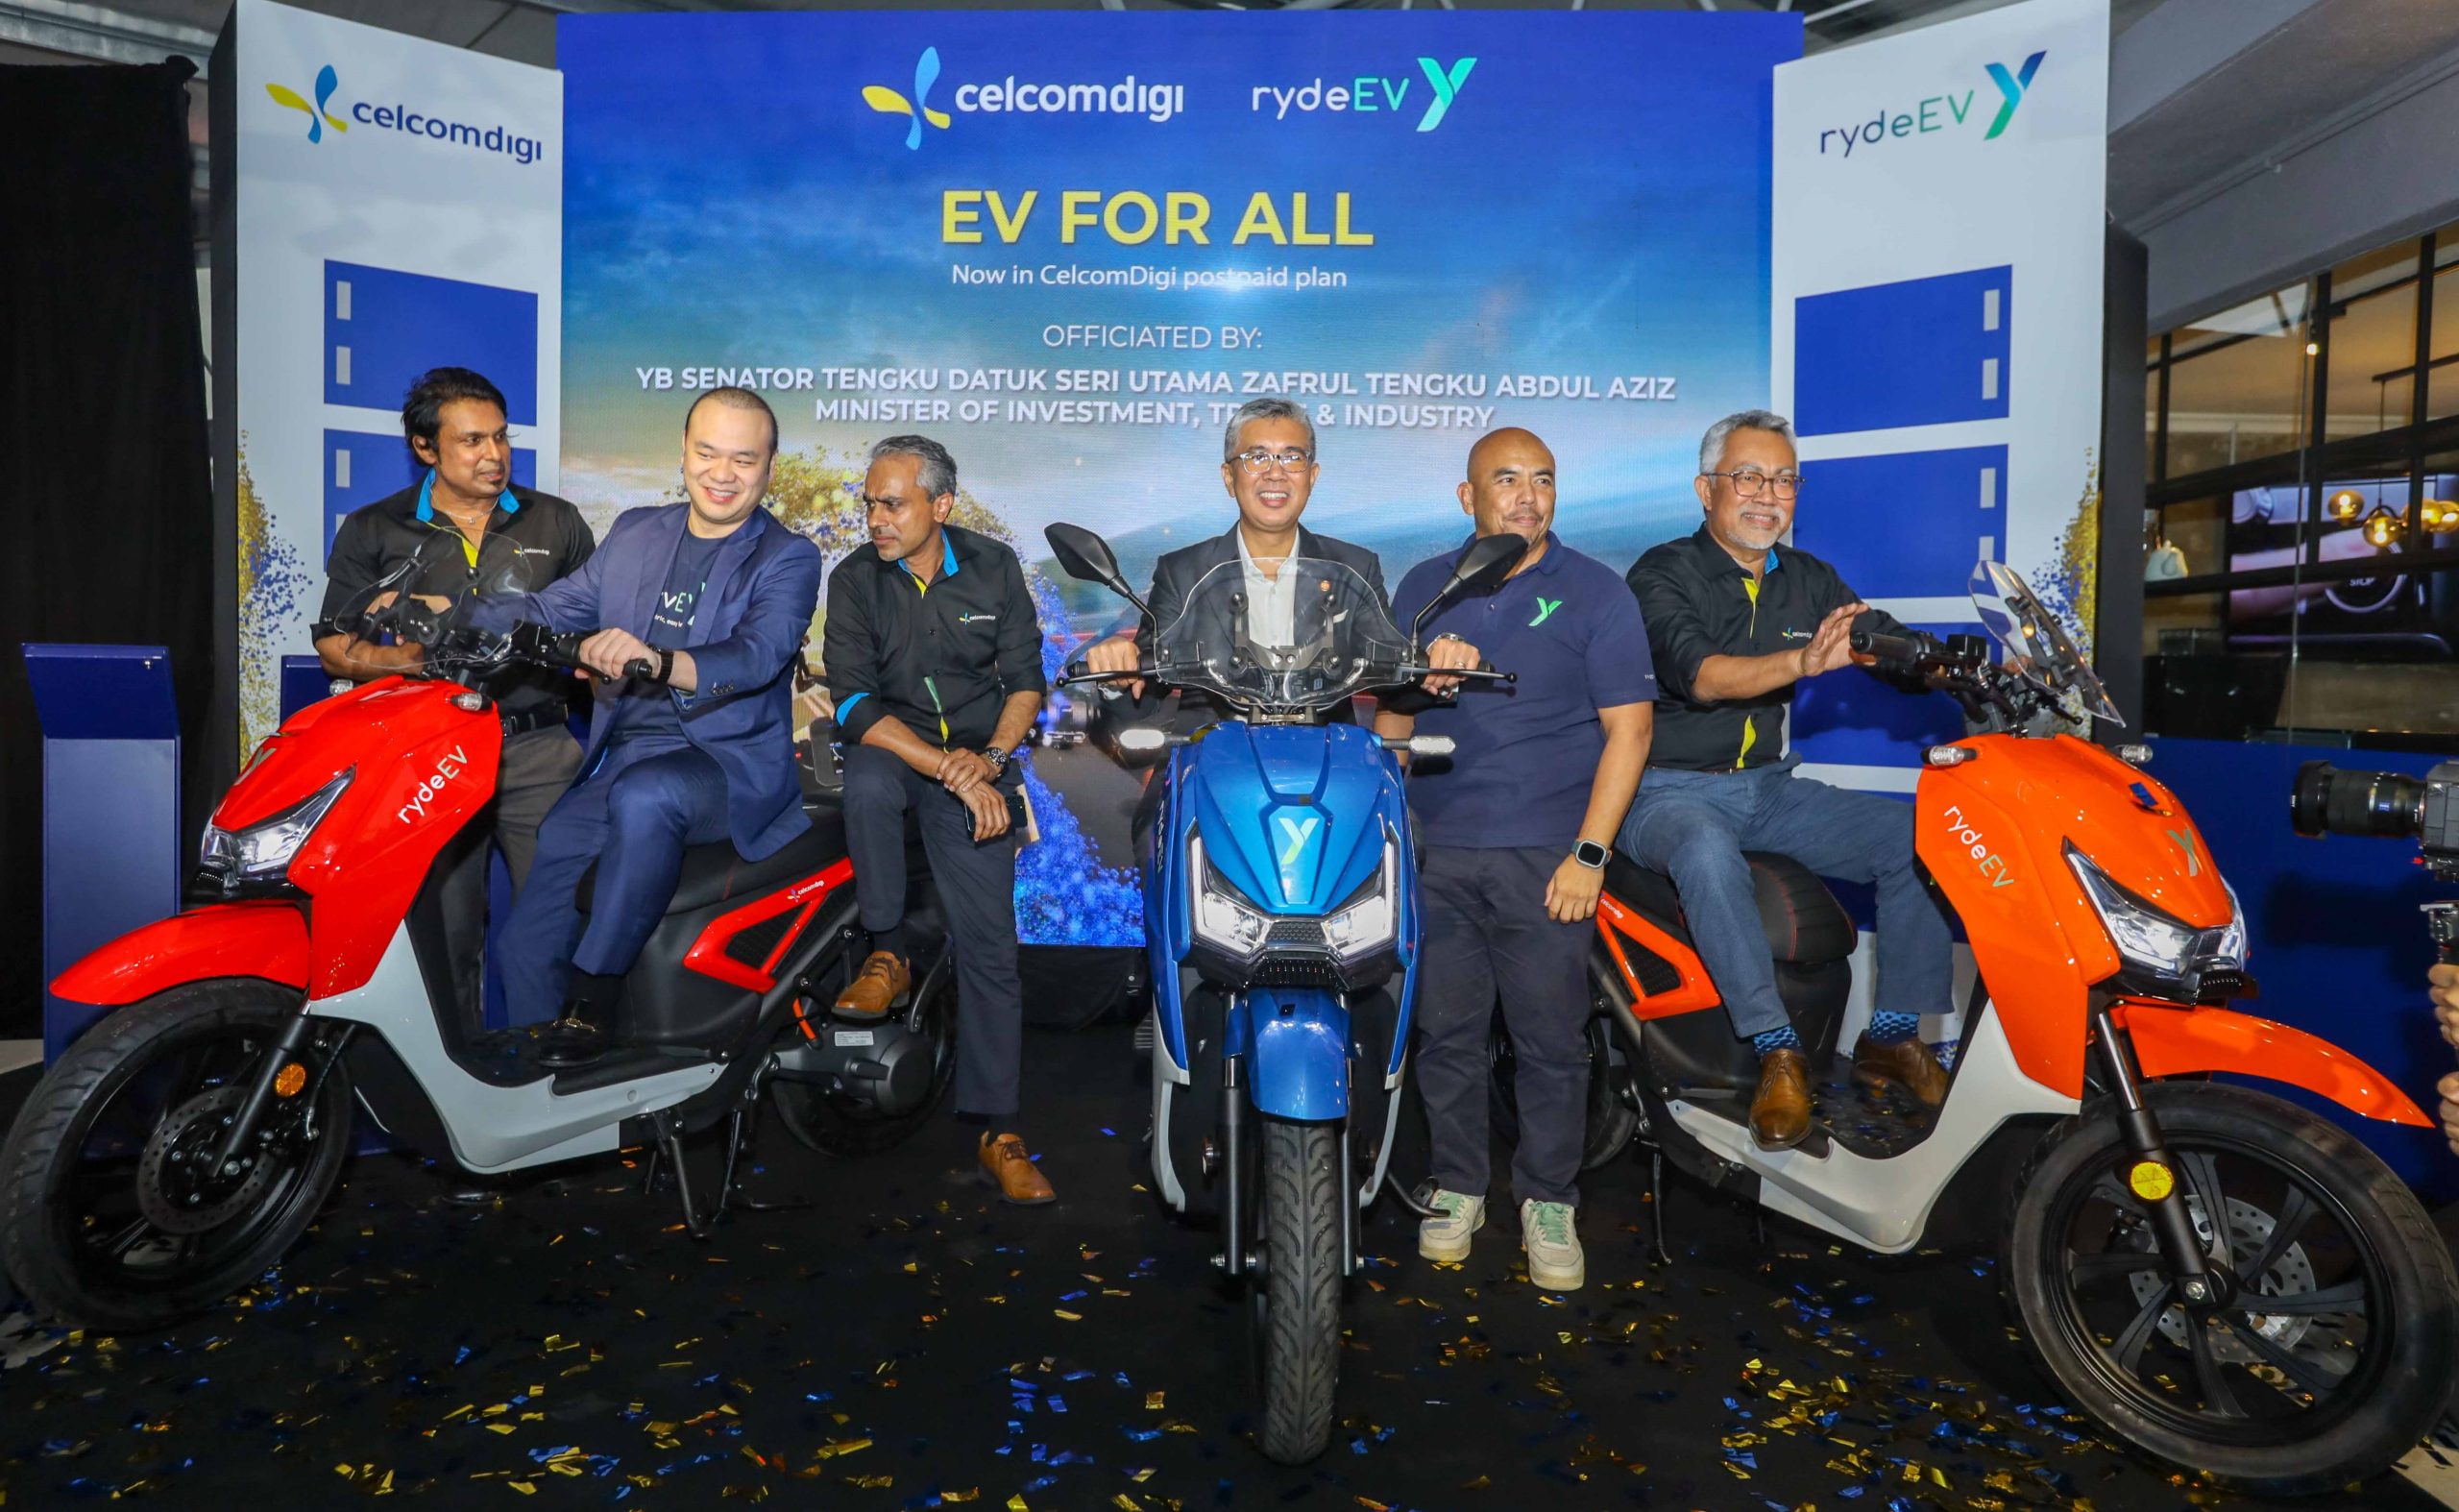 Yinson GreenTech and CelcomDigi announce Malaysia’s first lease-to-own rydeEV electric bike with postpaid plan subscription